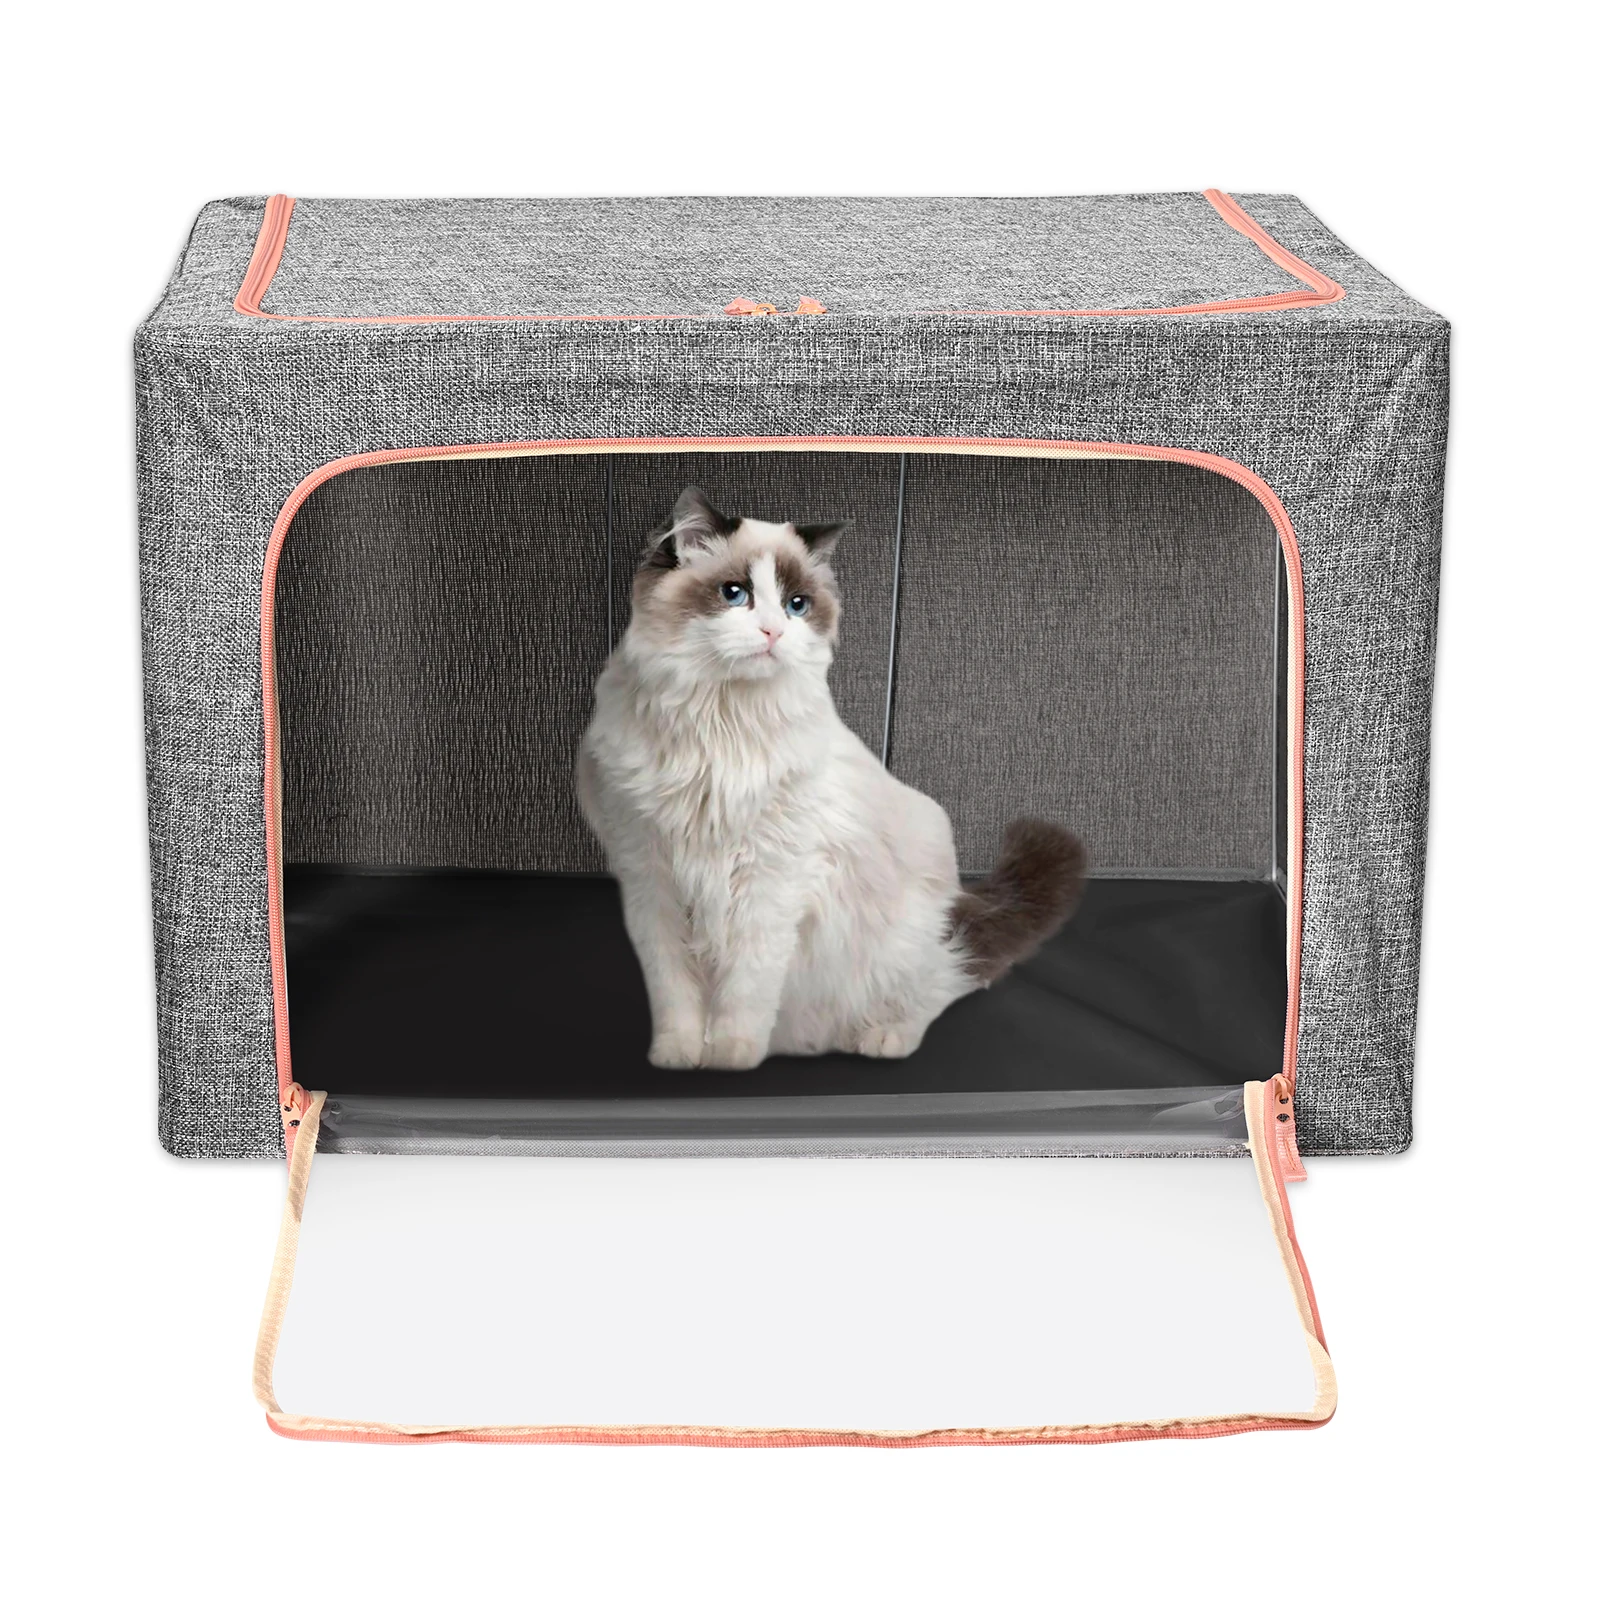 Pet Atomization Cage 56L Breathable Puppies/Medium Dog/Cat Inhalation Oxygen Therapy Chamber Pet Oxygen Inhalation Box ICU Cage with Waterproof Pet Heating Pad 